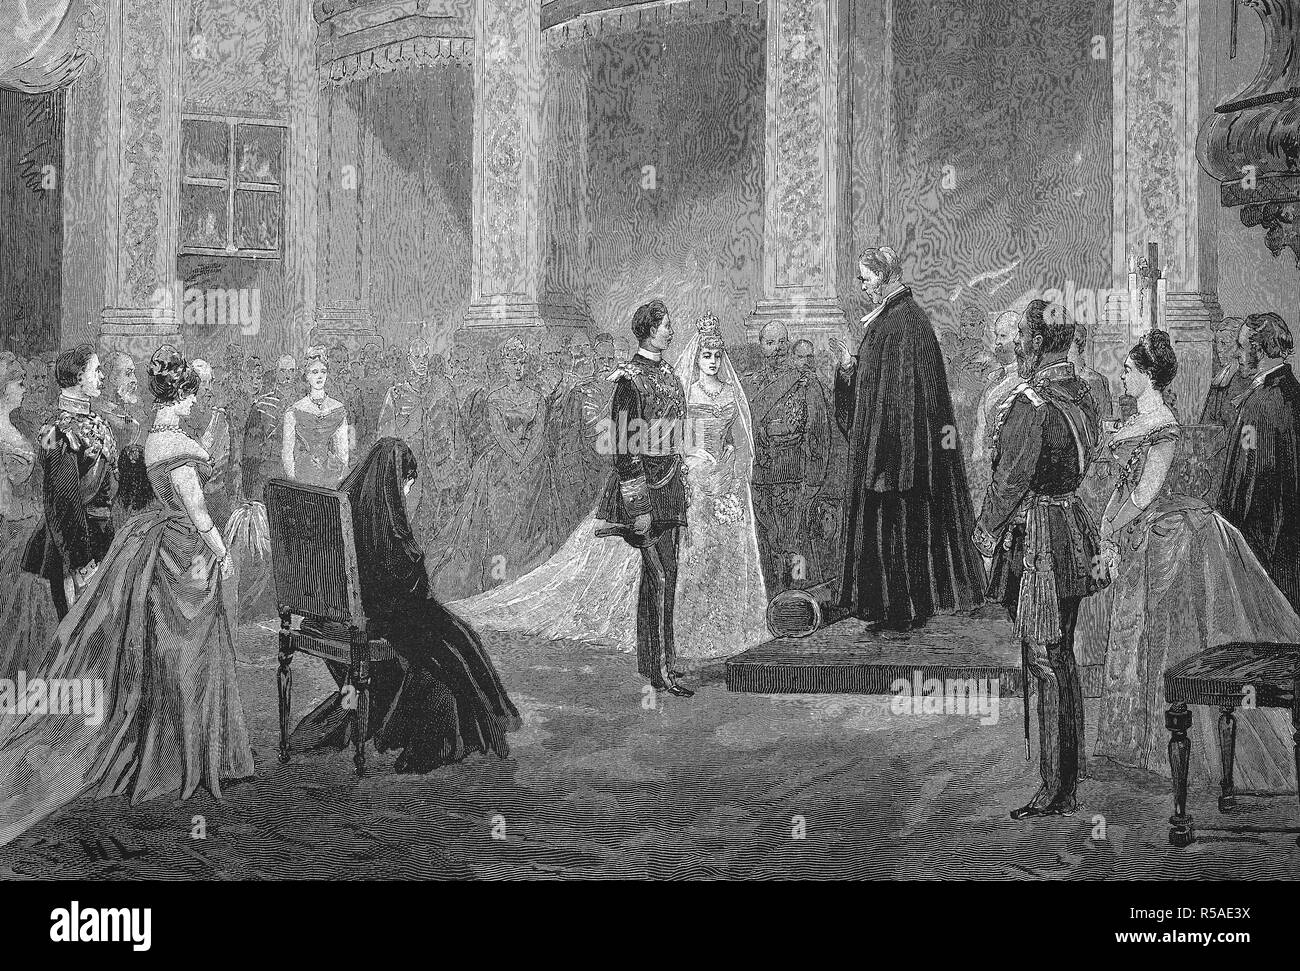 Wedding of Prince Henry of Prussia and Princess Irene of Hesse 1888, in the Chapel of Palais Charlottenburg, Berlin, woodcut Stock Photo